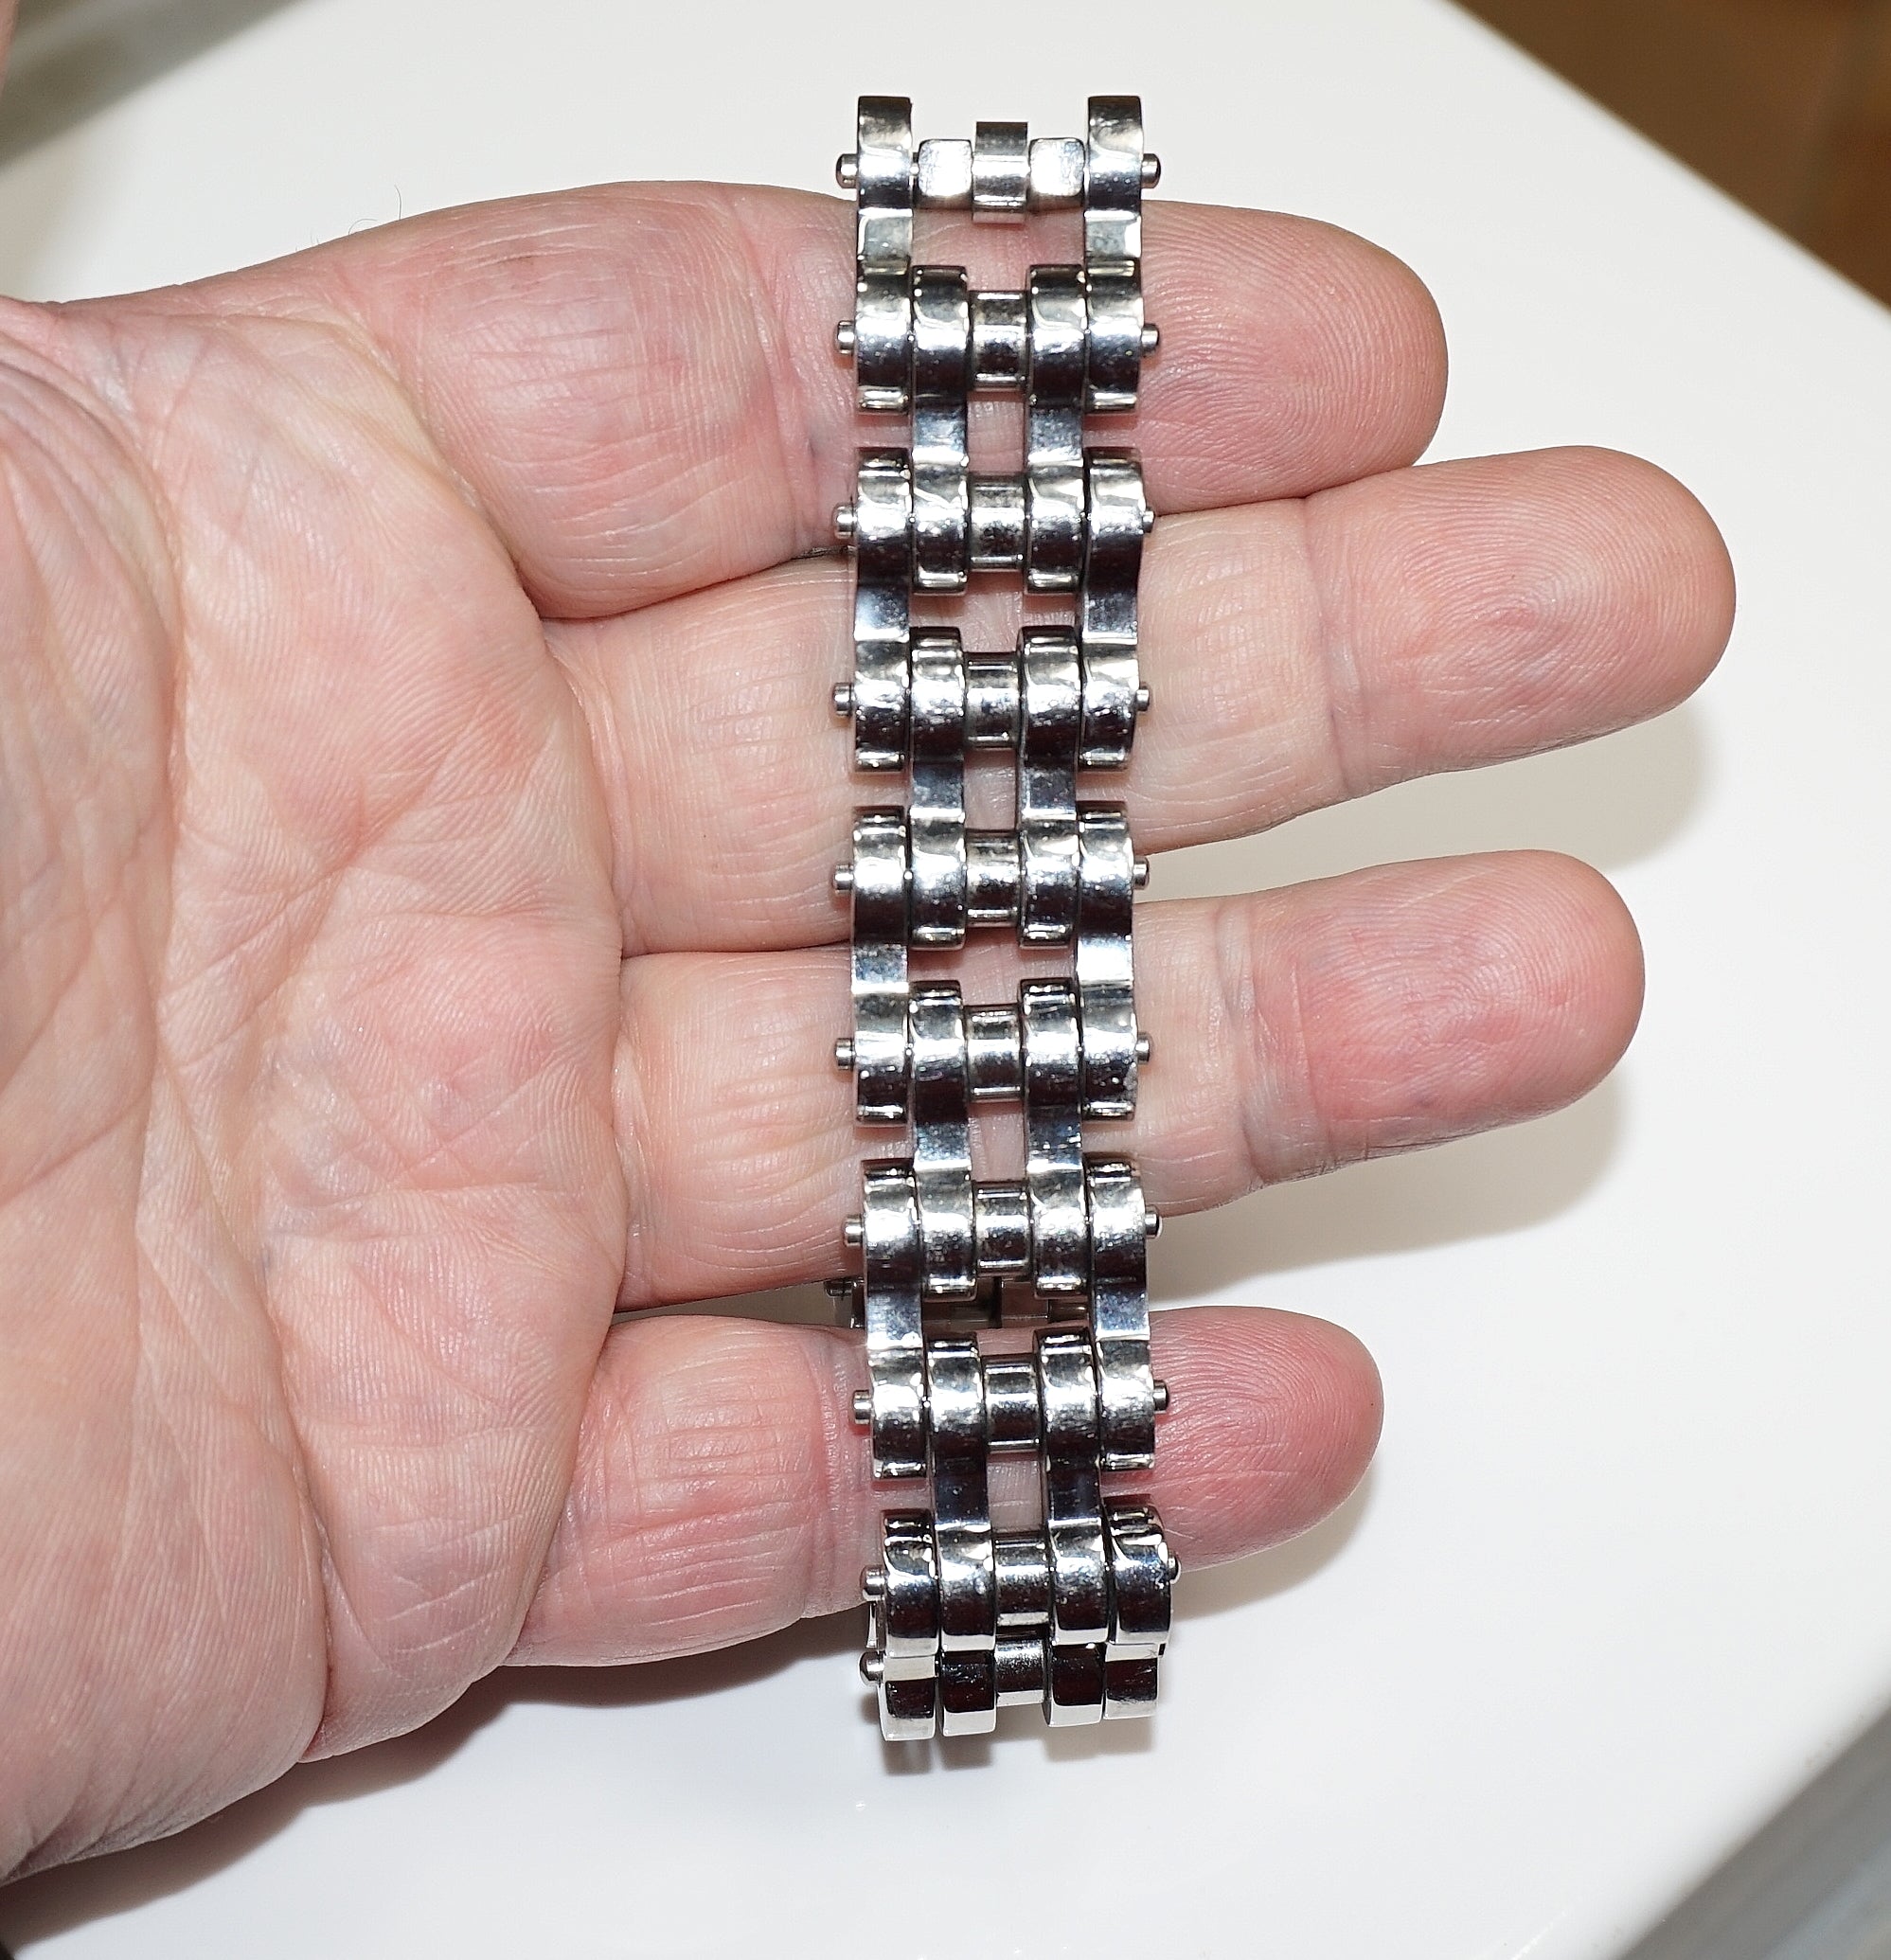  Big Man's Gold Stainless Steel Motorcycle Chain Bracelet - HDsmallPARTS.com